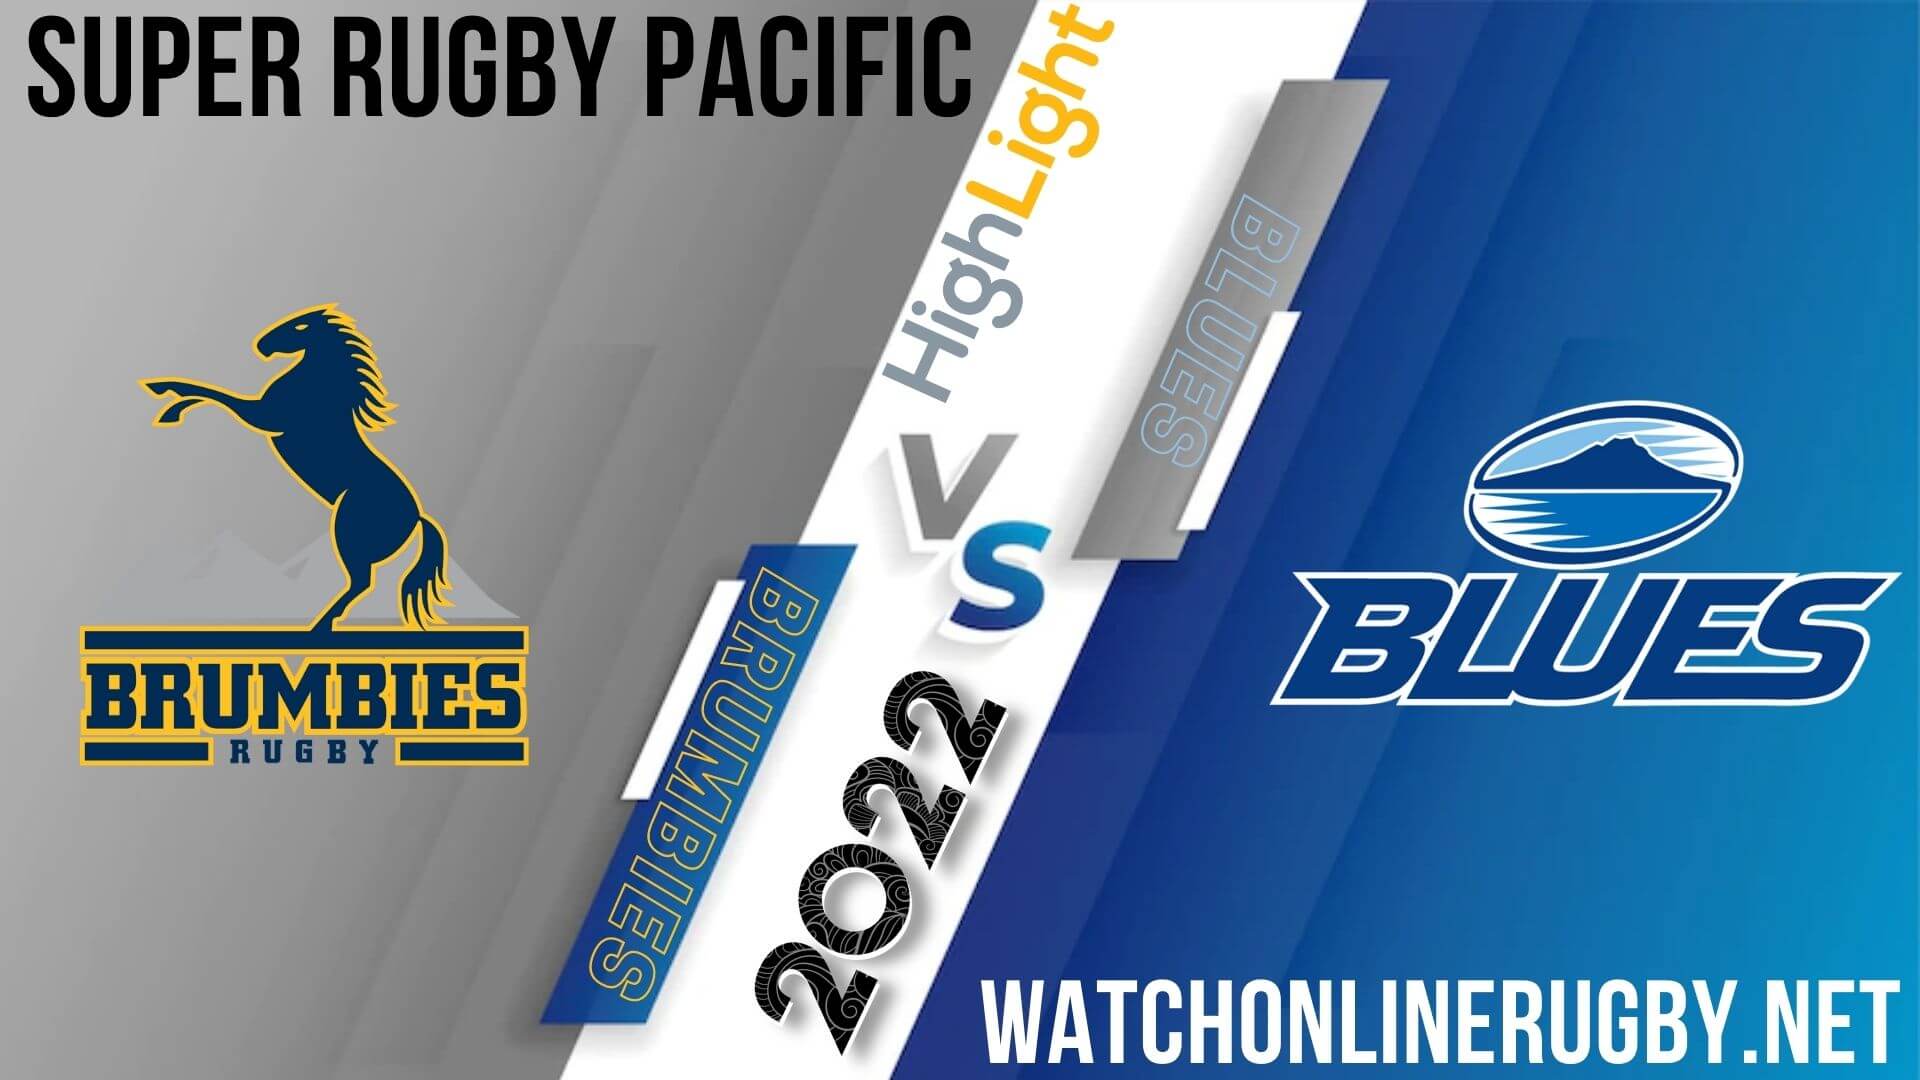 Brumbies Vs Blues Super Rugby Pacific 2022 RD 14